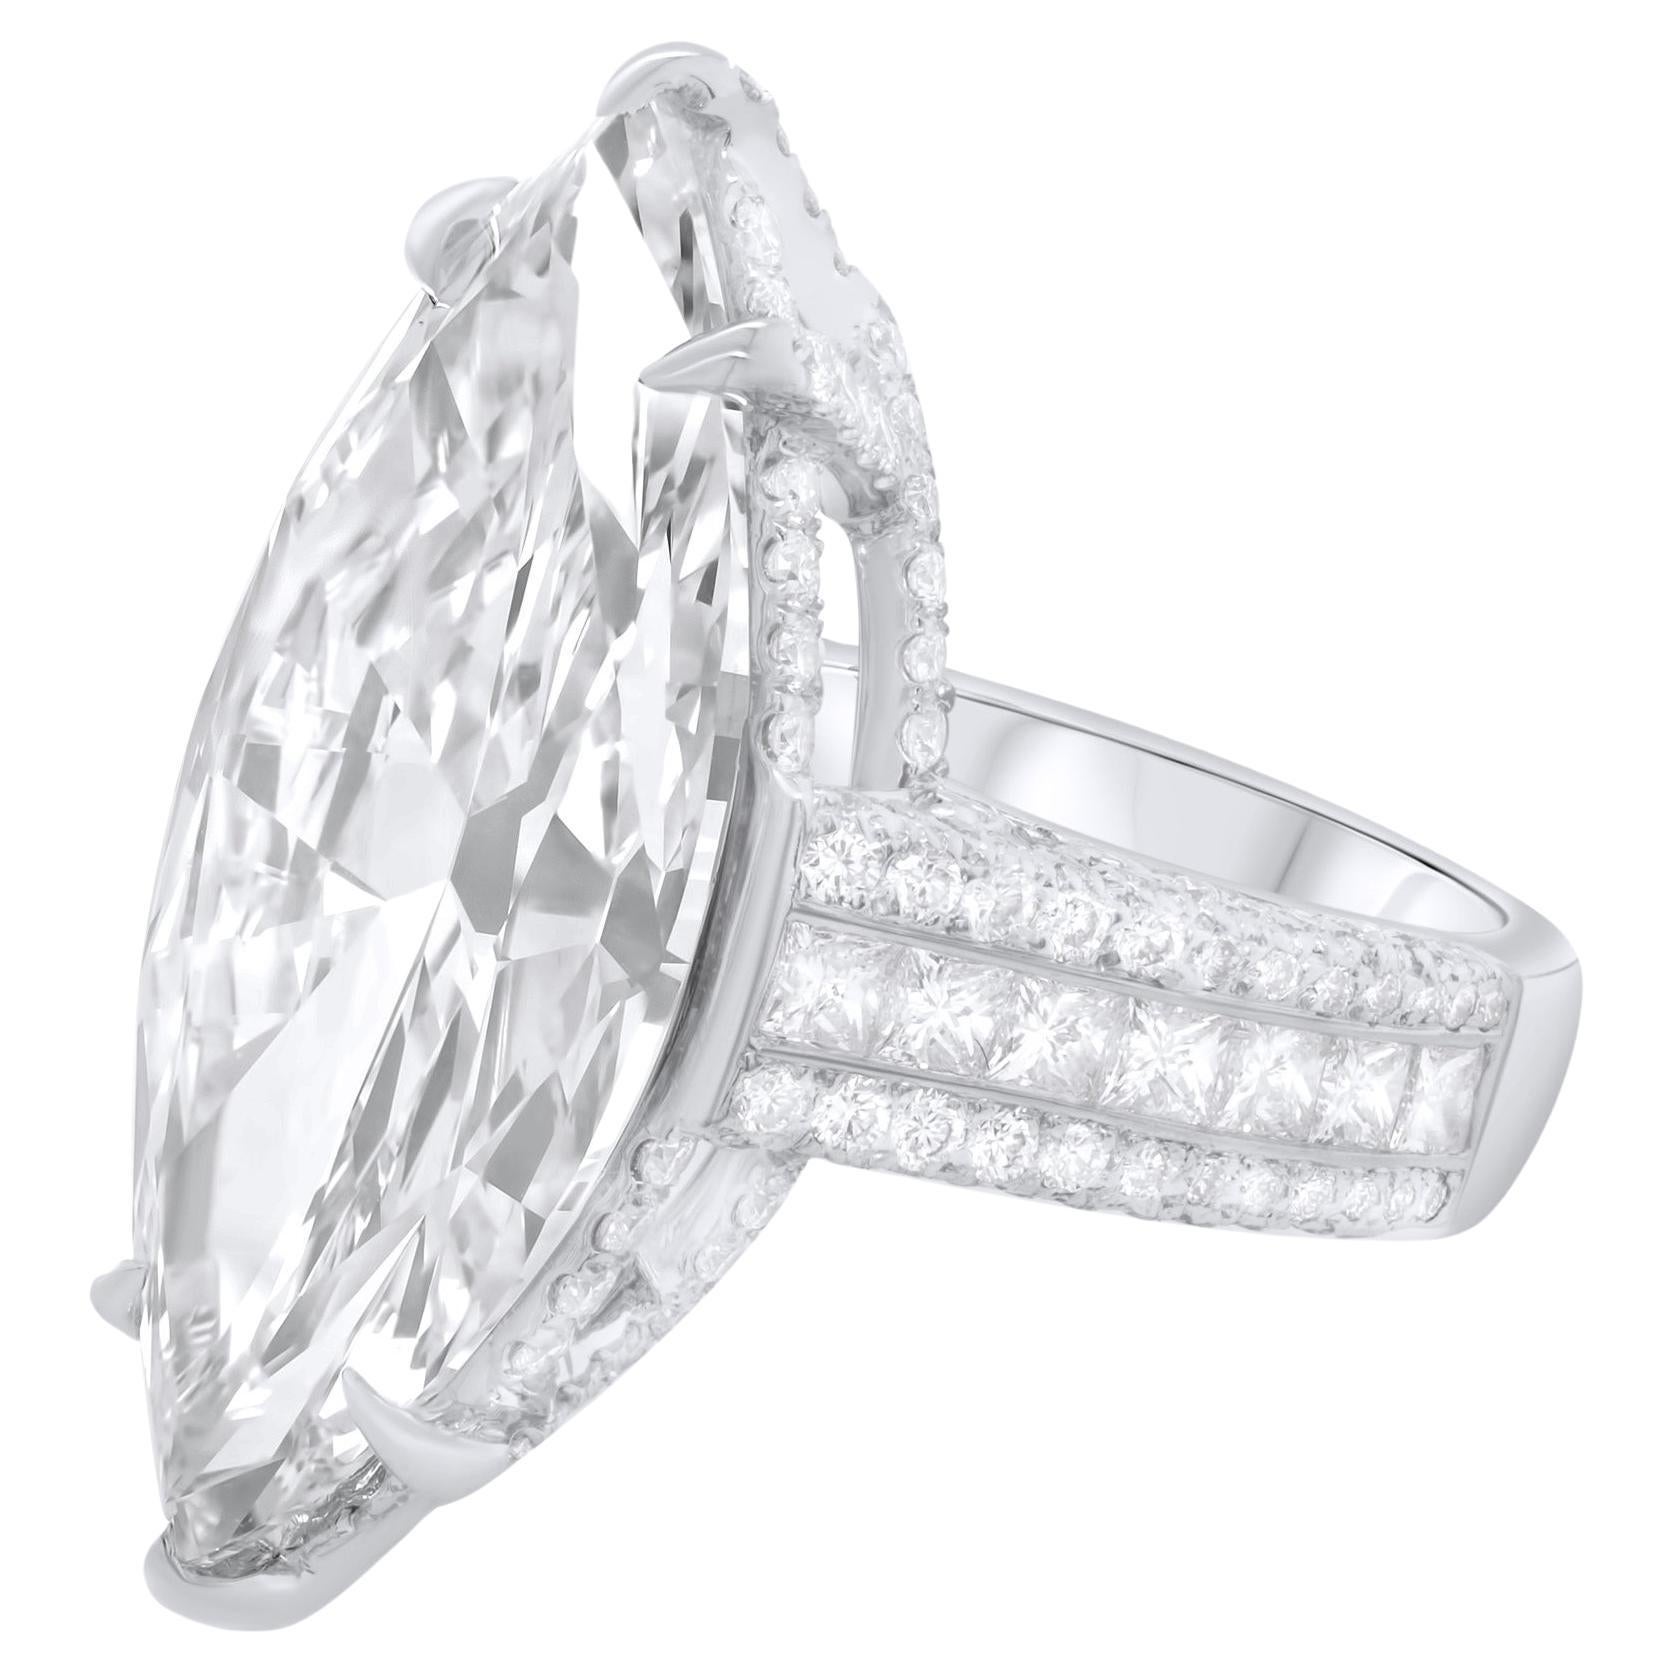 Diana M. 19.85 Carat Marquise Cut Flawless Diamond Ring For Sale